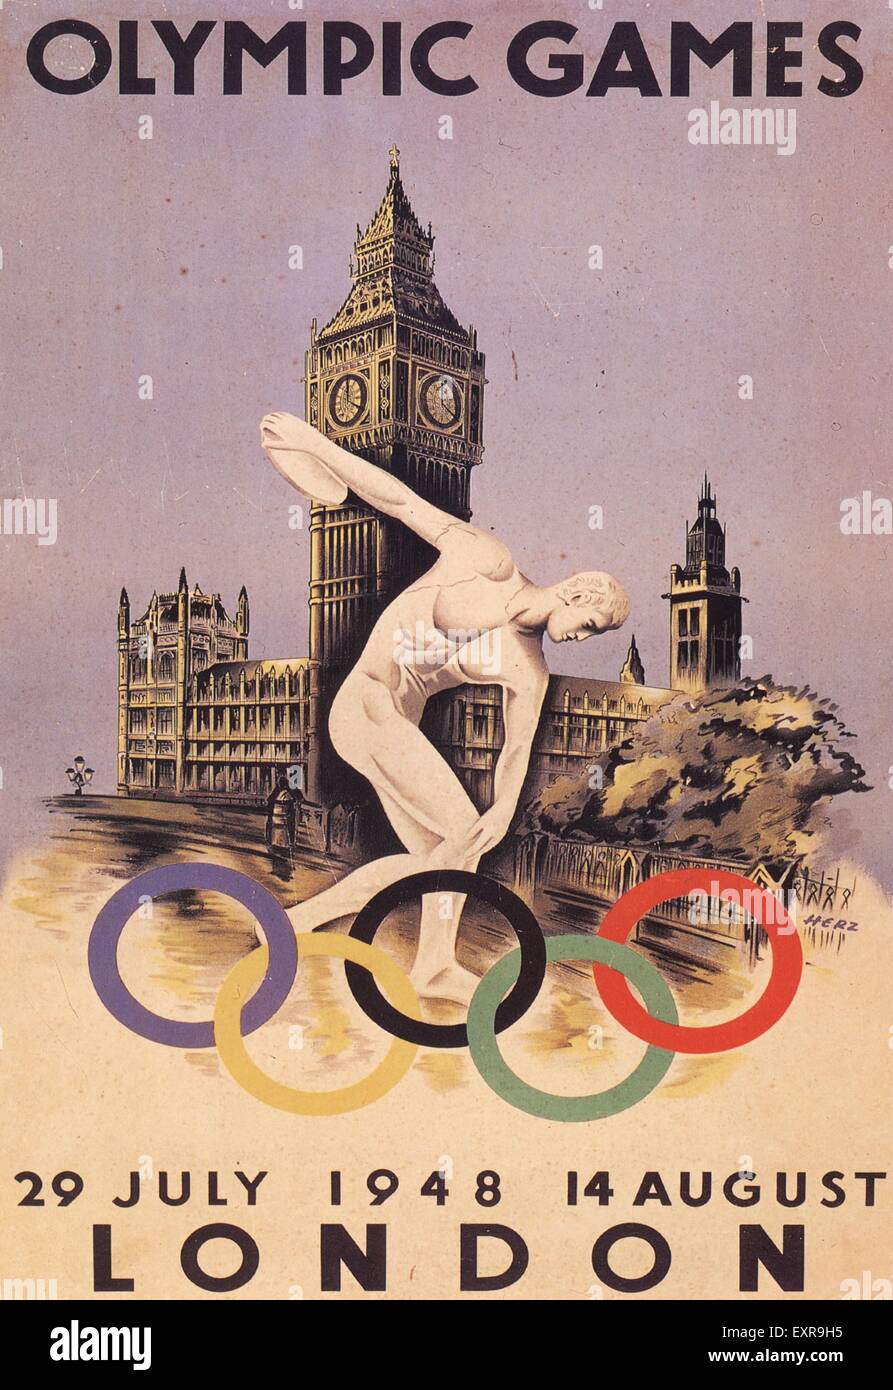 1940s UK Olympic Games Poster Stock Photo